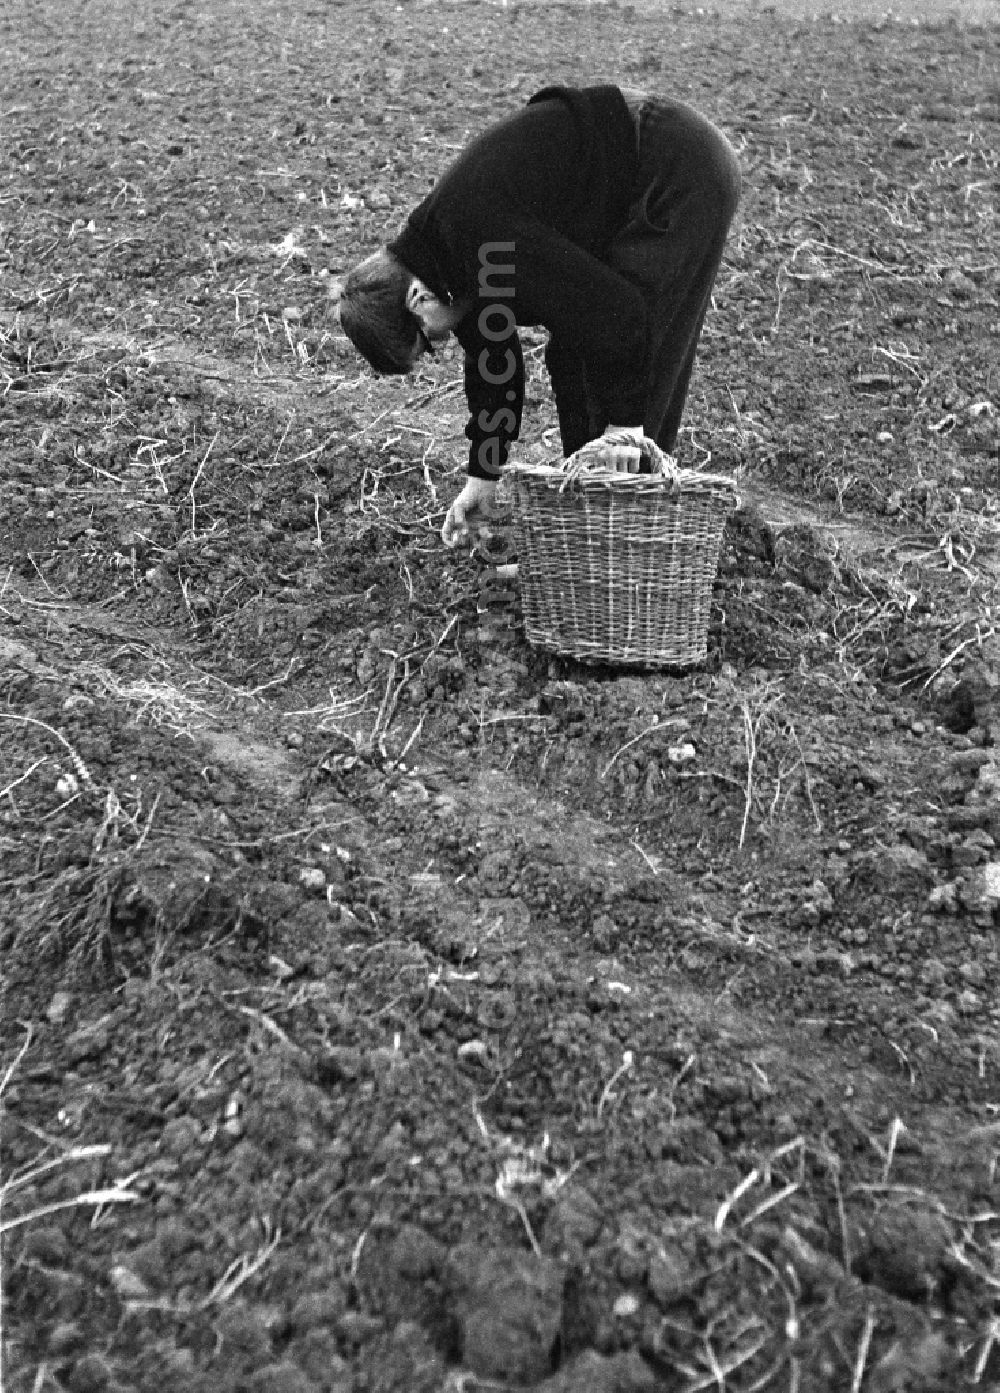 GDR photo archive: Werneuchen - Potato harvesting in a field by 9th grade students in Werneuchen, Brandenburg in the territory of the former GDR, German Democratic Republic